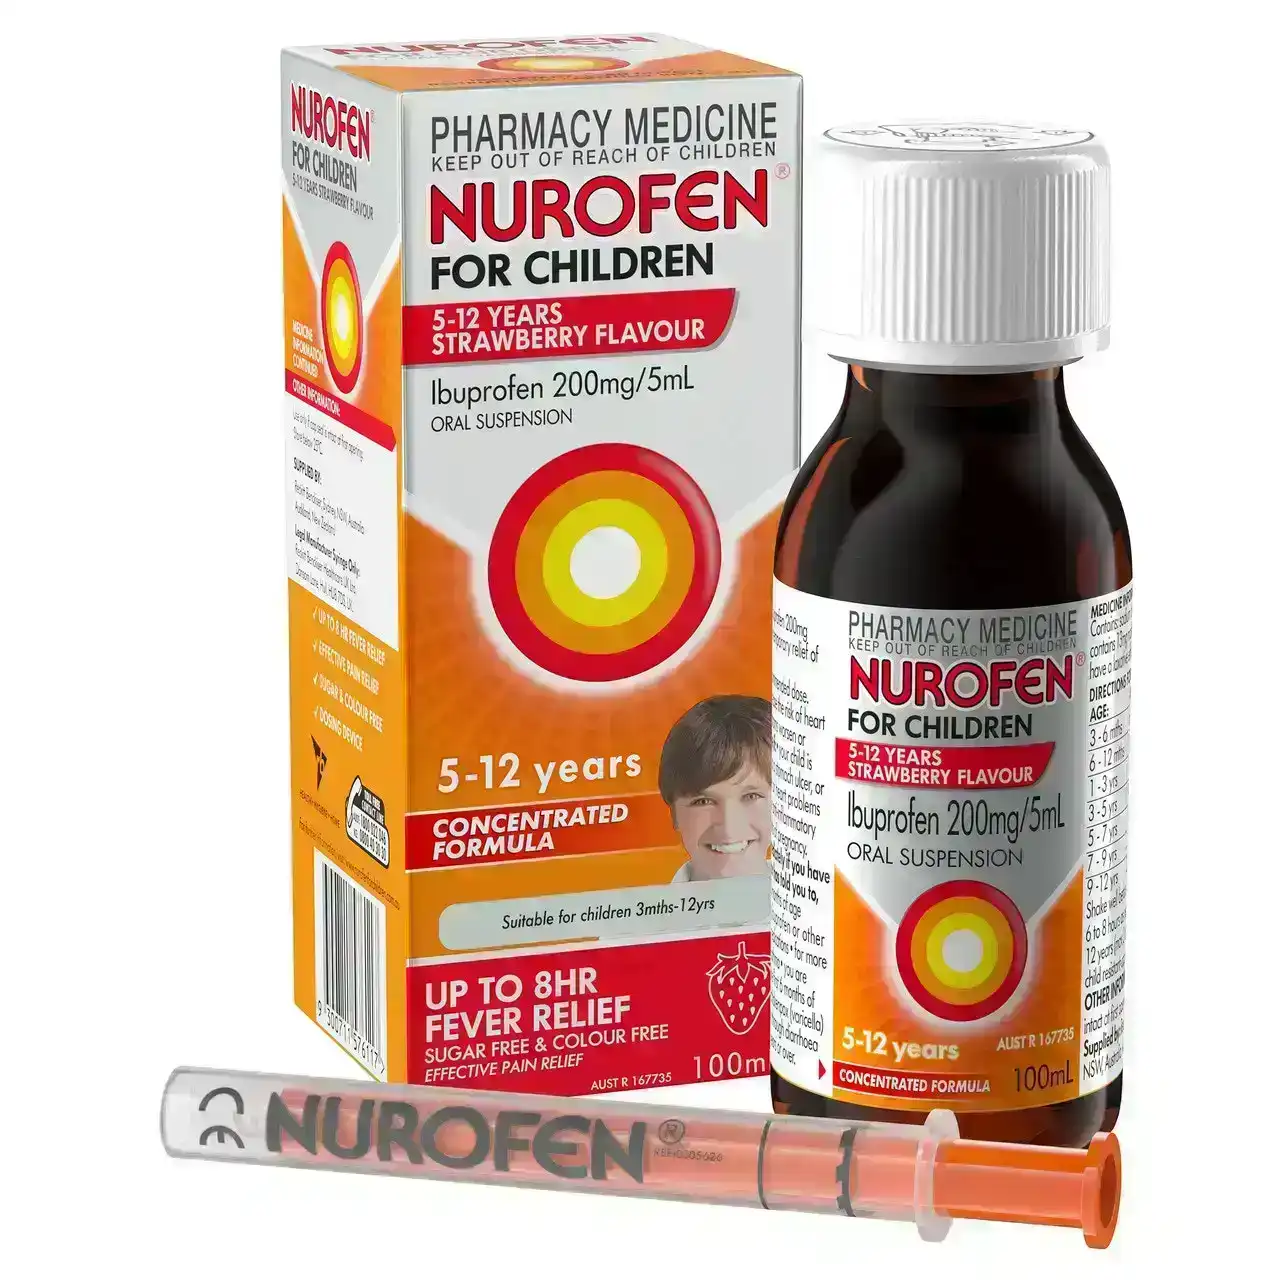 Nurofen For Children 5-12yrs Pain and Fever Relief Concentrated Liquid 200mg/5mL Ibuprofen Strawberry 100mL